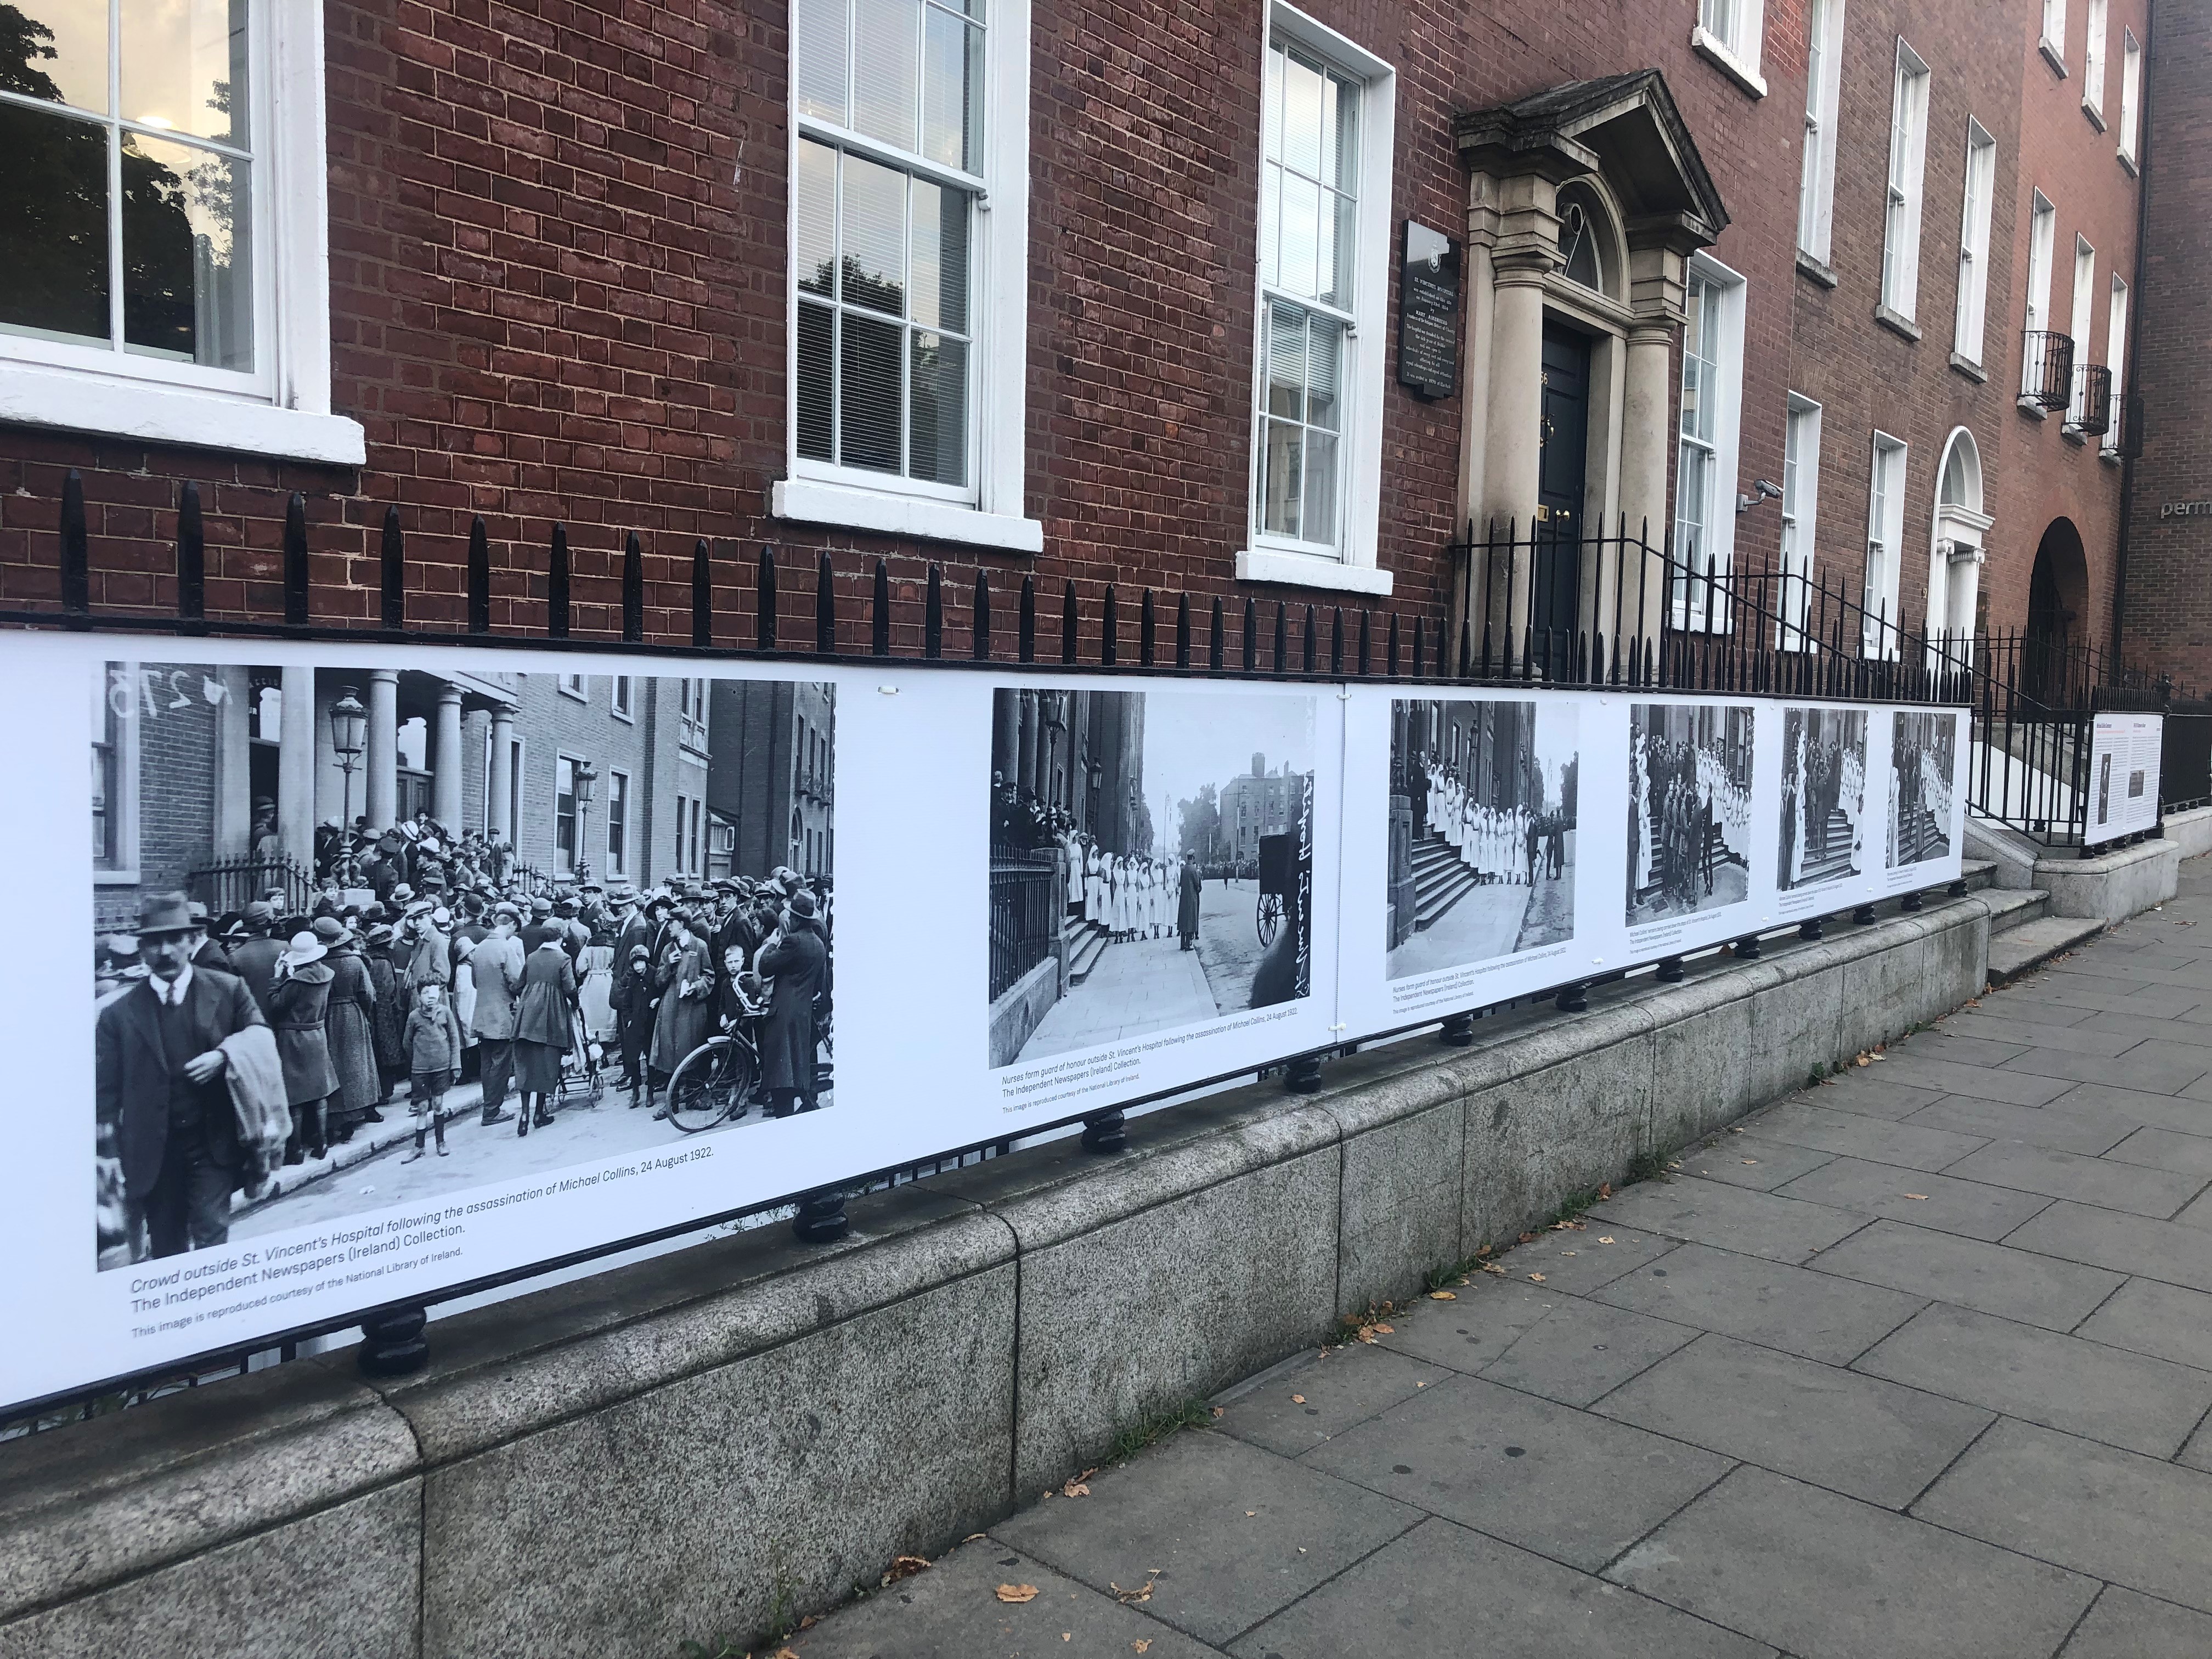 Michael Collins centenary and its historic connection to 56-59 St Stephen’s Green